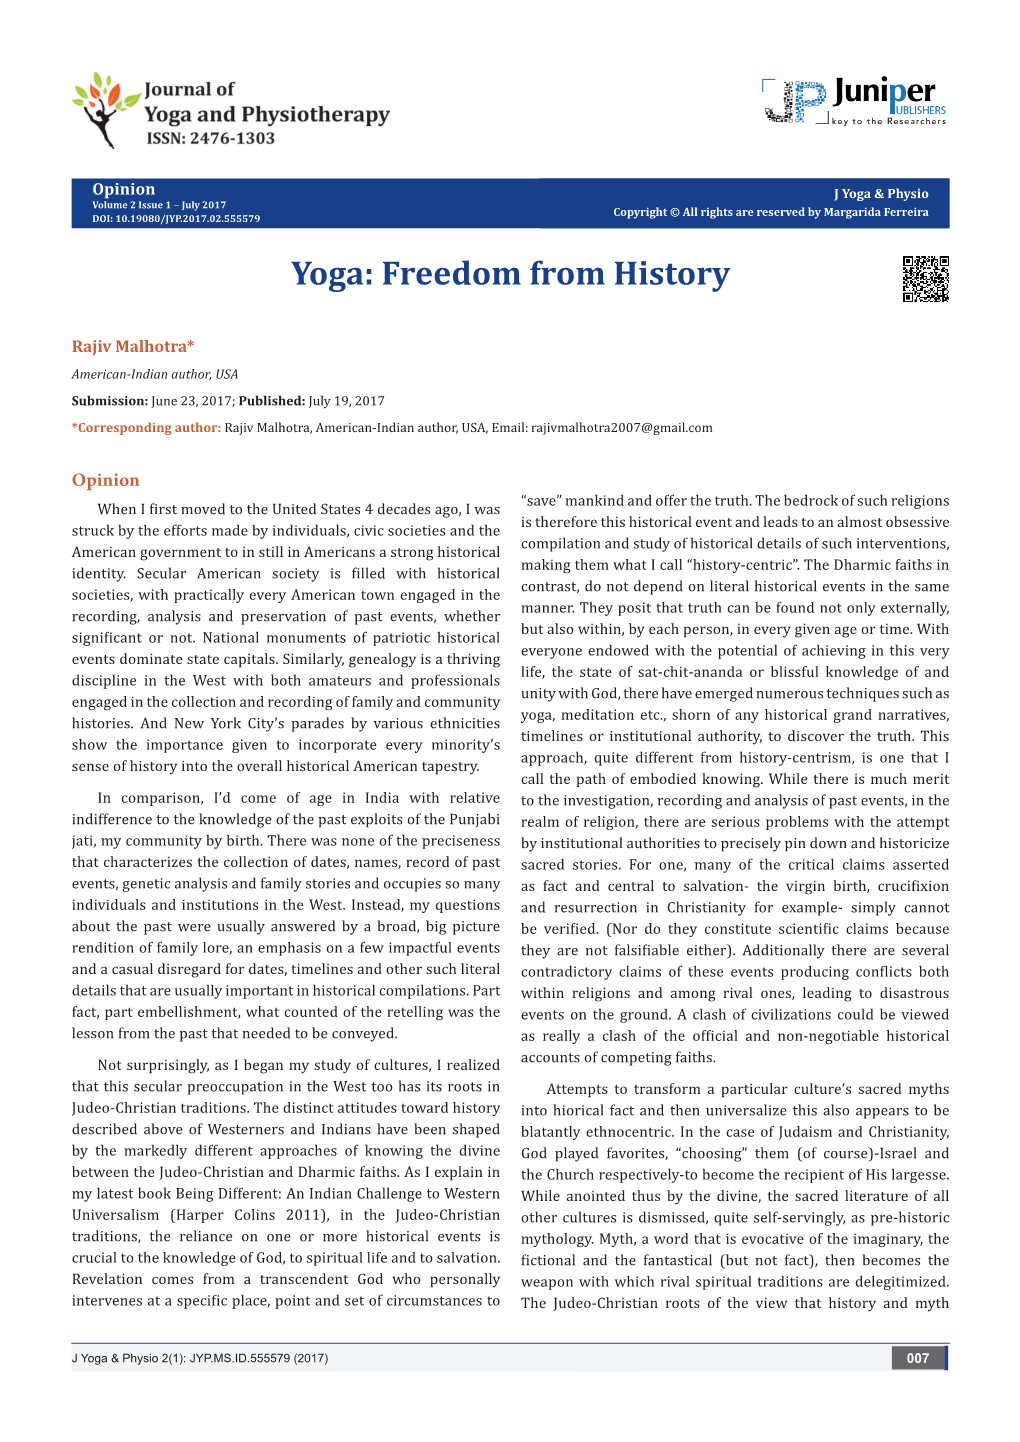 Yoga & Physio Volume 2 Issue 1 - July 2017 Copyright © All Rights Are Reserved by Margarida Ferreira DOI: 10.19080/JYP.2017.02.555579